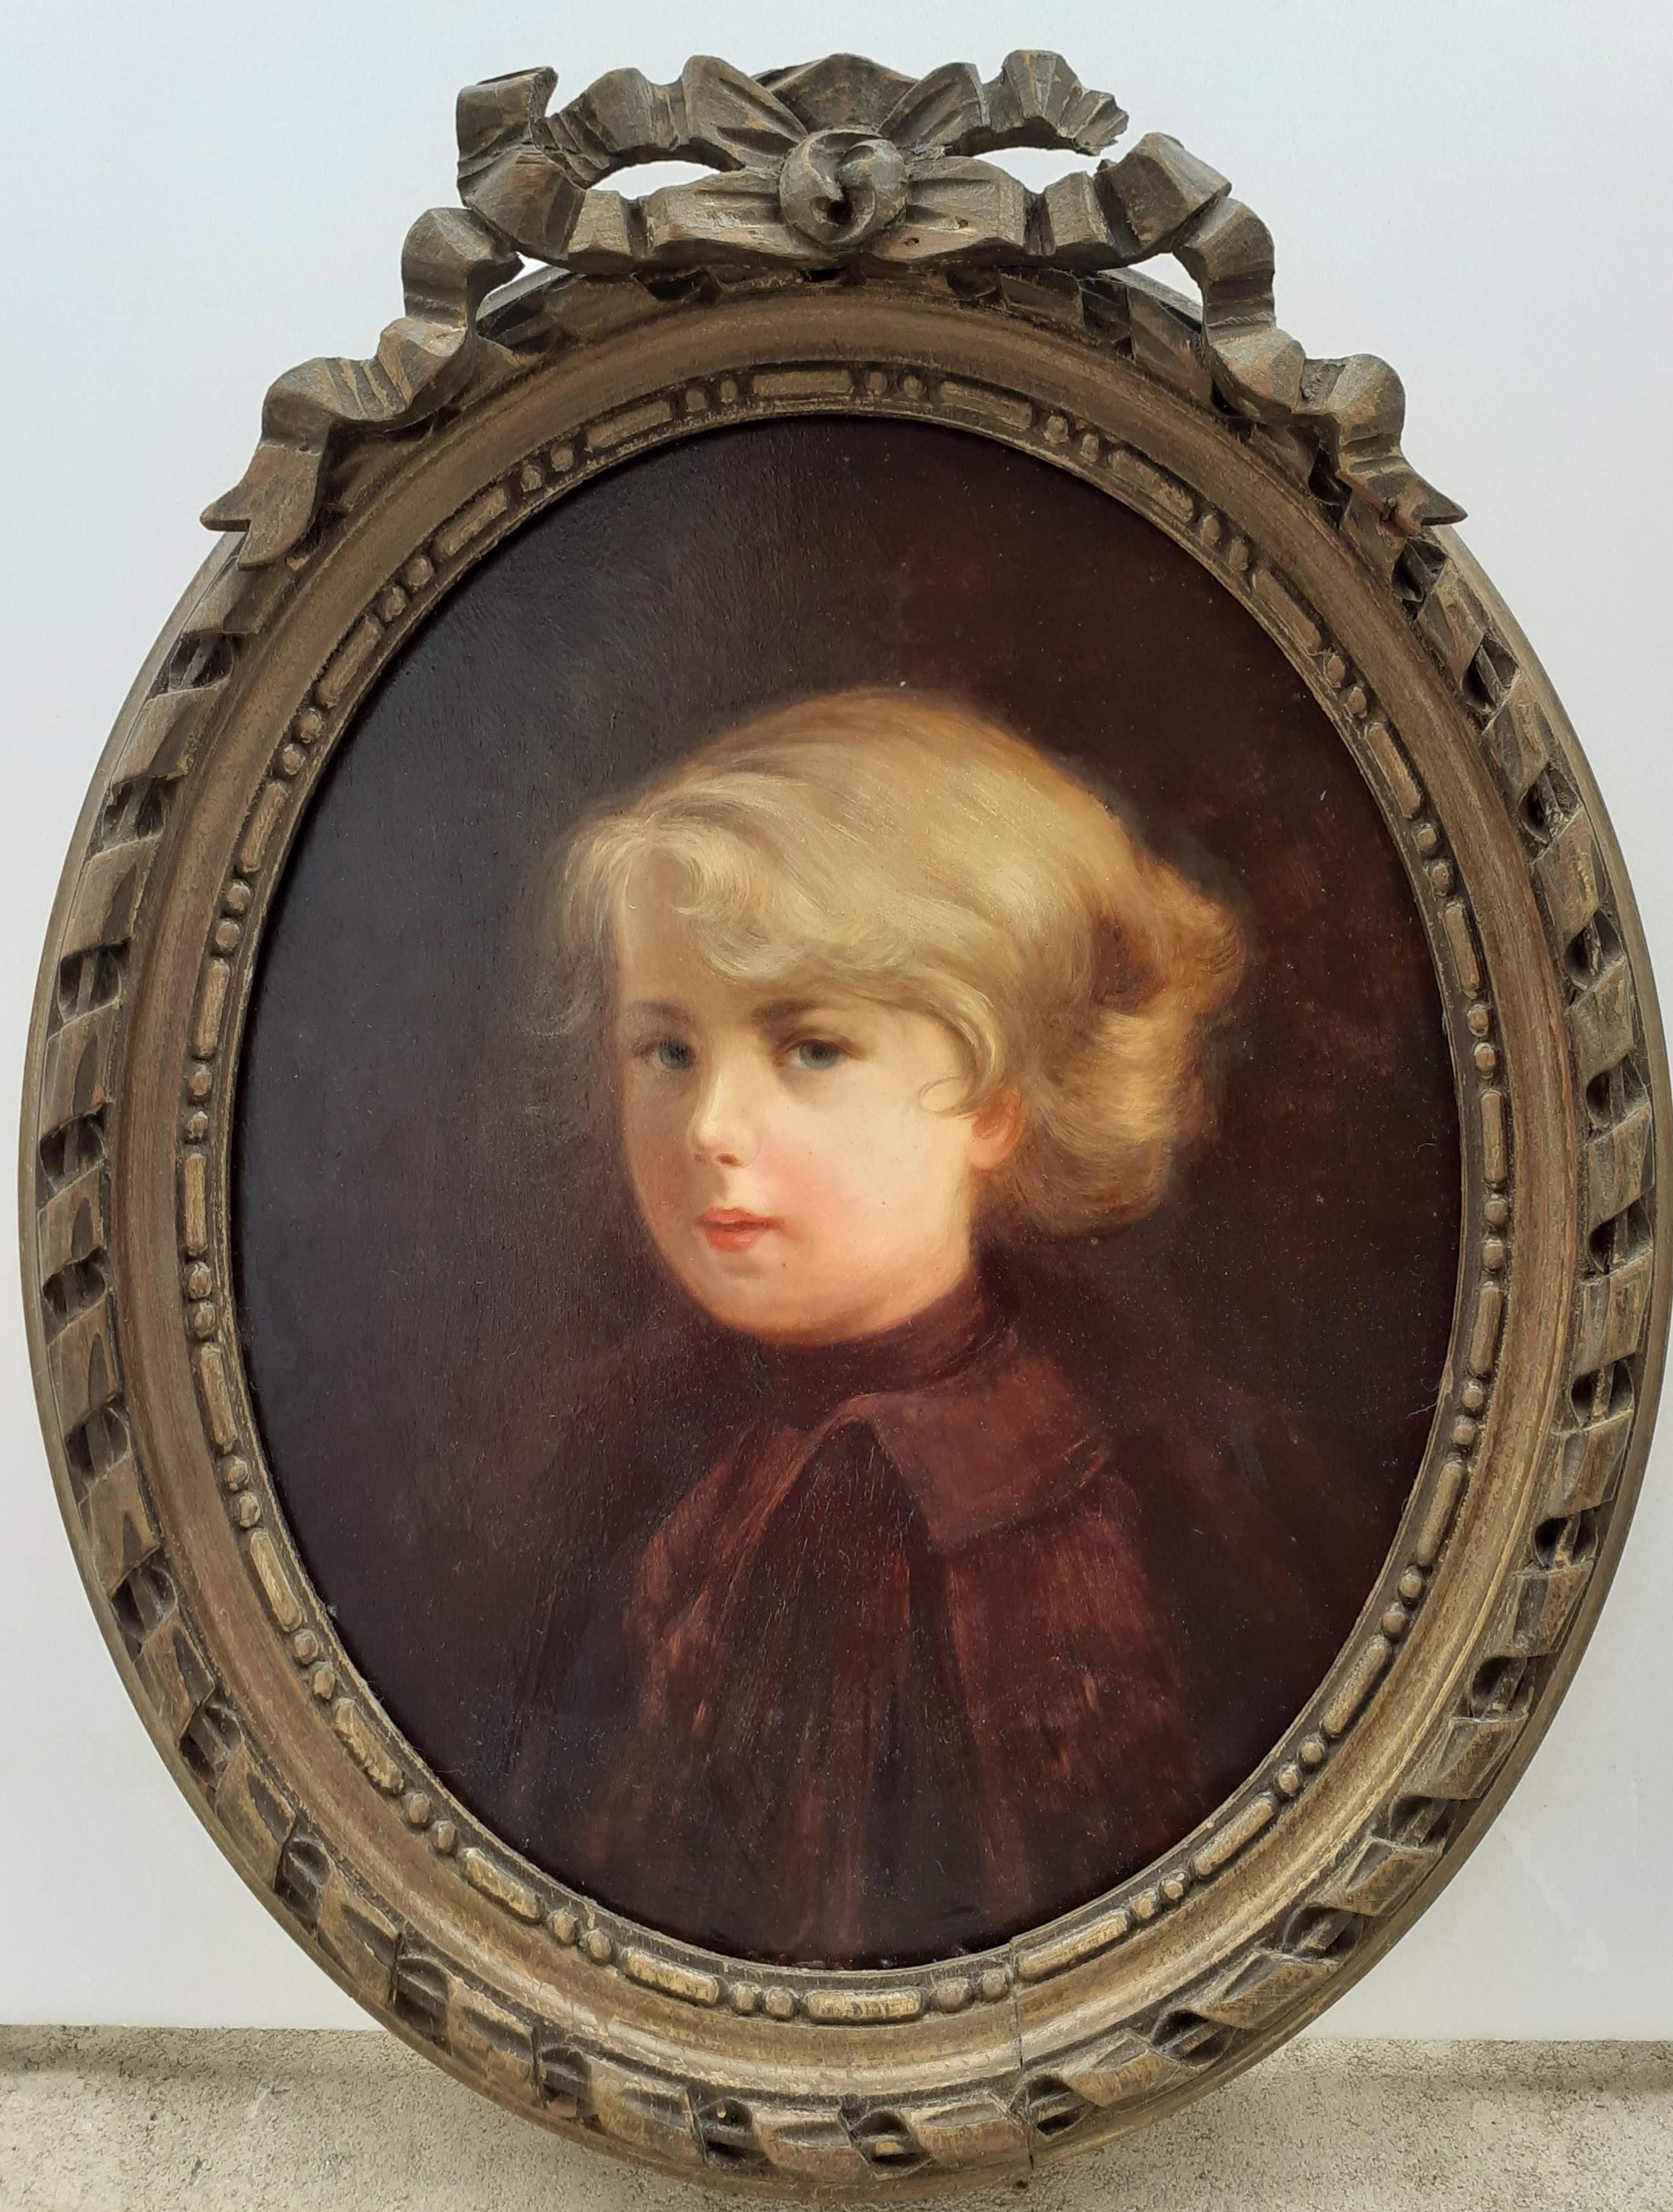 (Attributed to) Gilbert Stuart Newton Portrait Painting - Presumed portrait of Napoleon's son as a boy, early antique oil painting